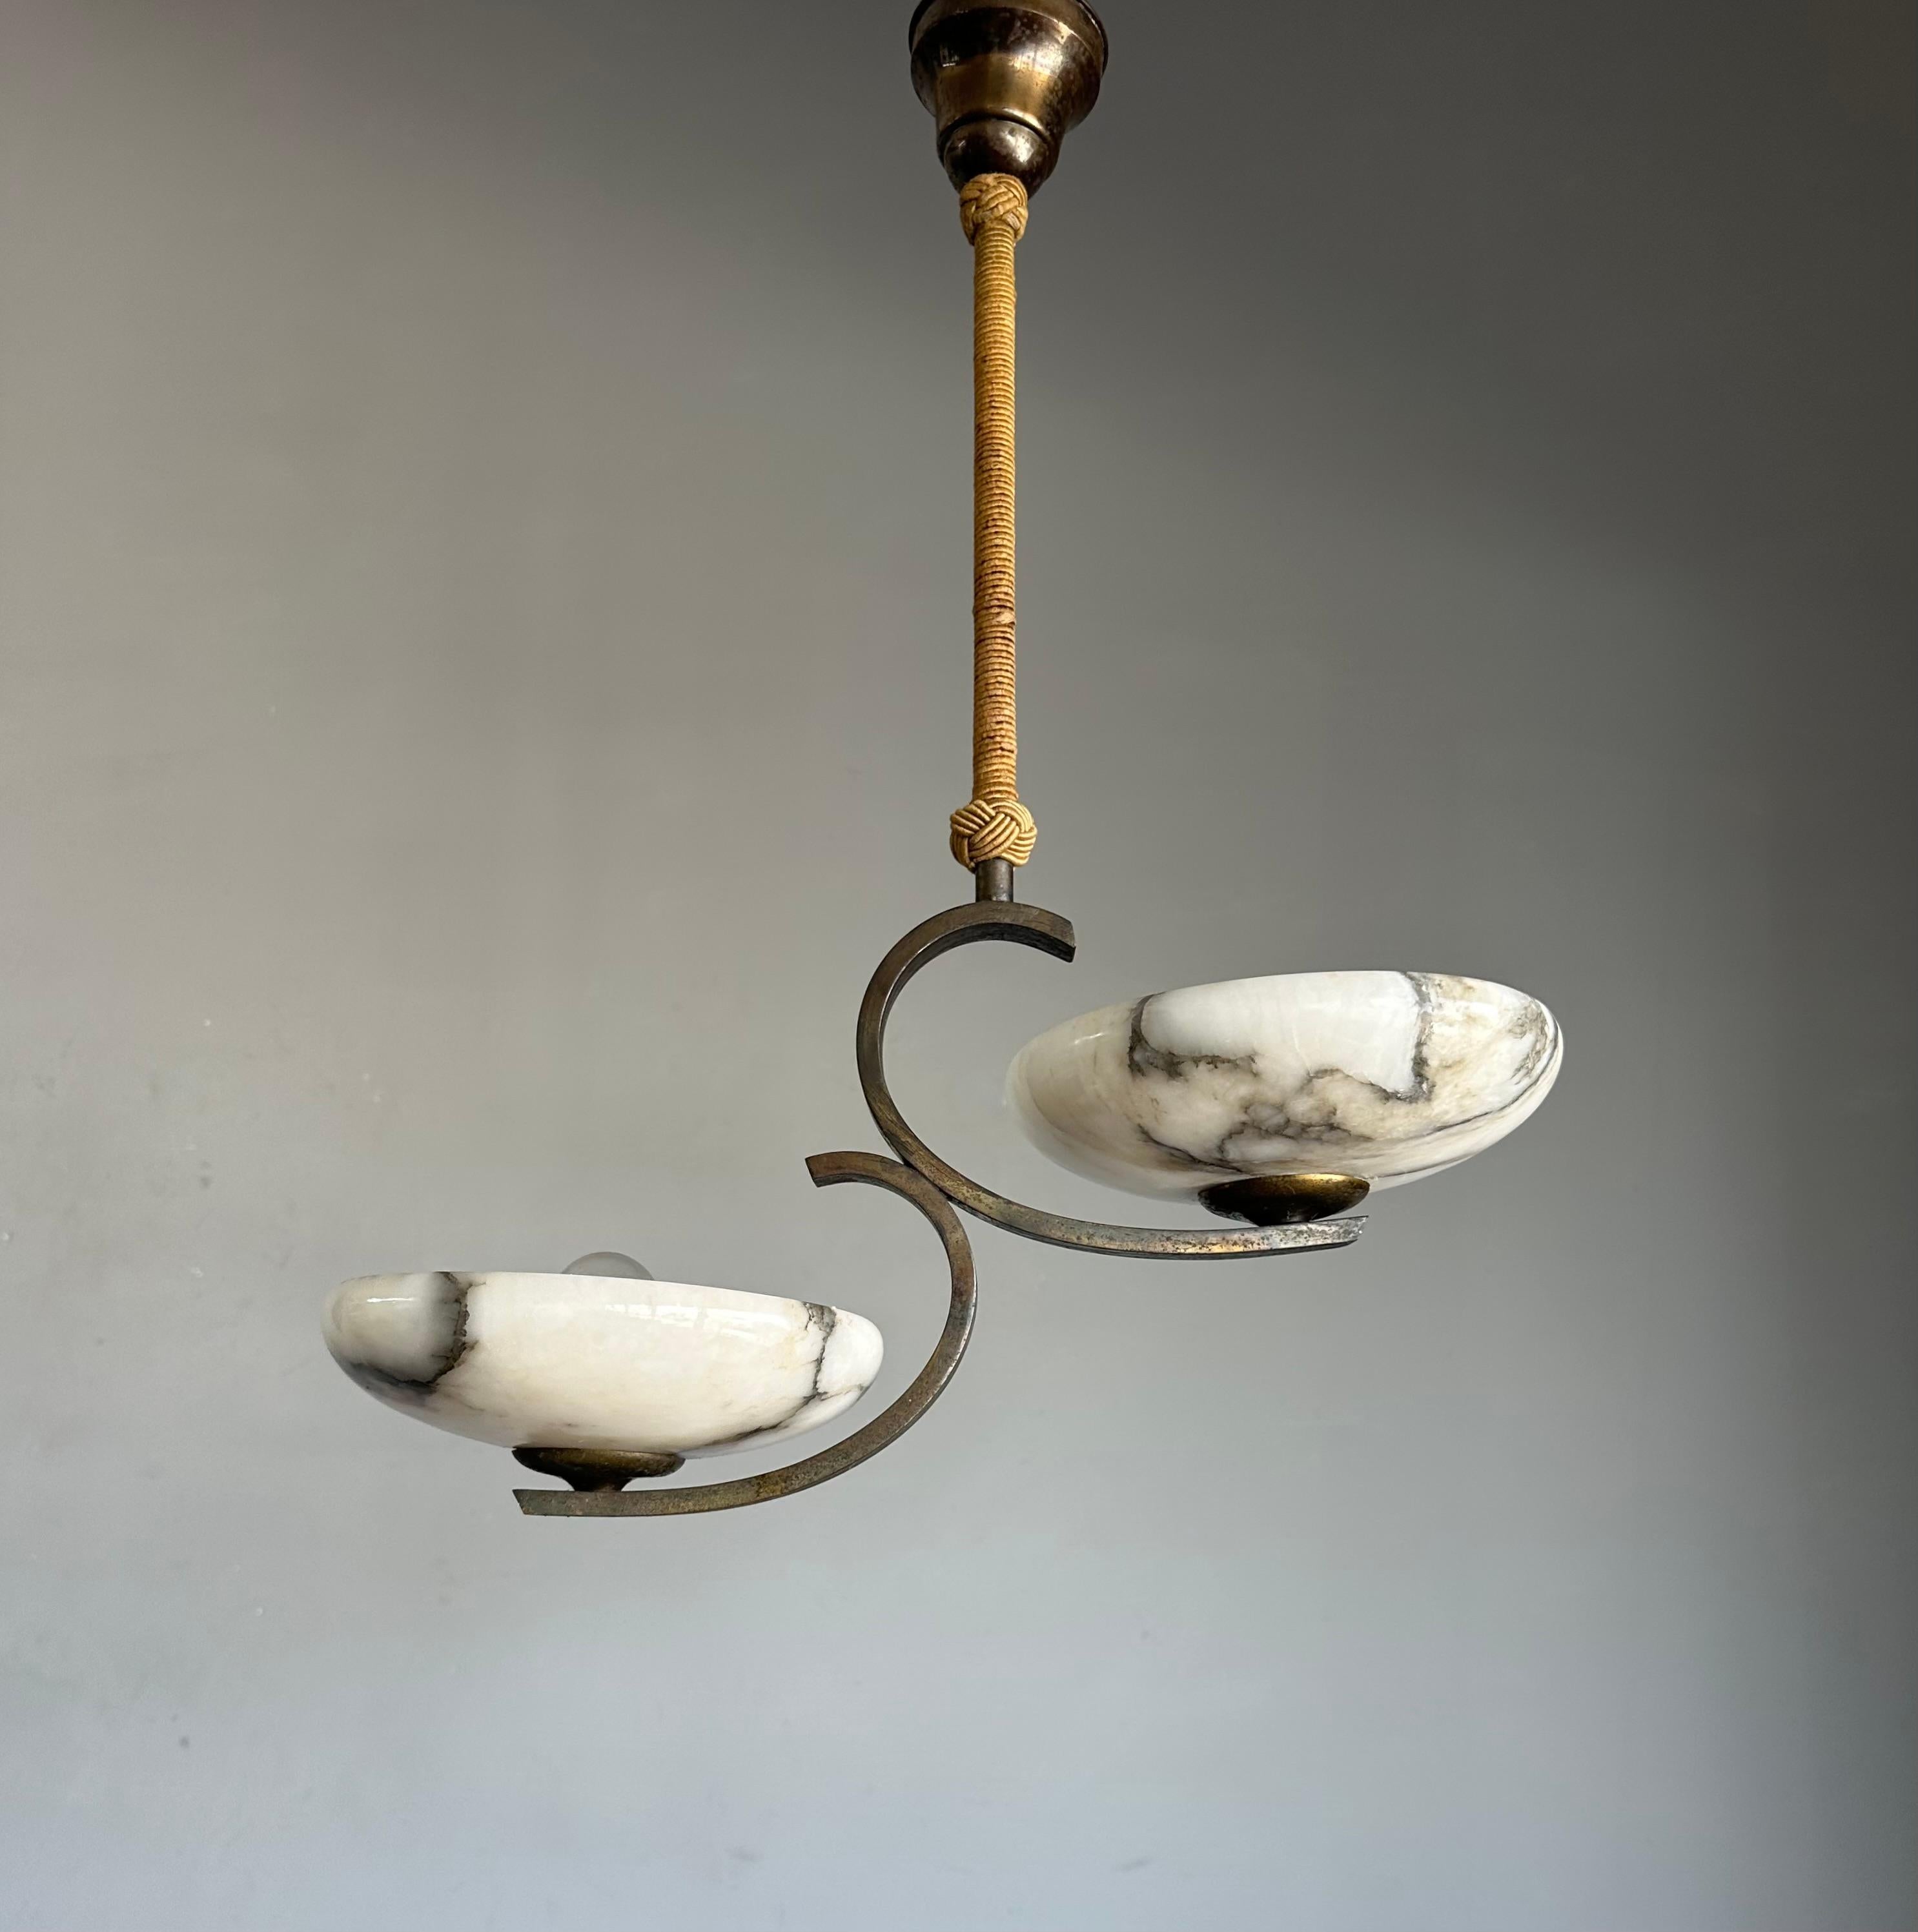 Top Art Deco Design Brass and Two Light Alabaster shades Pendant Light / Fixture In Good Condition For Sale In Lisse, NL